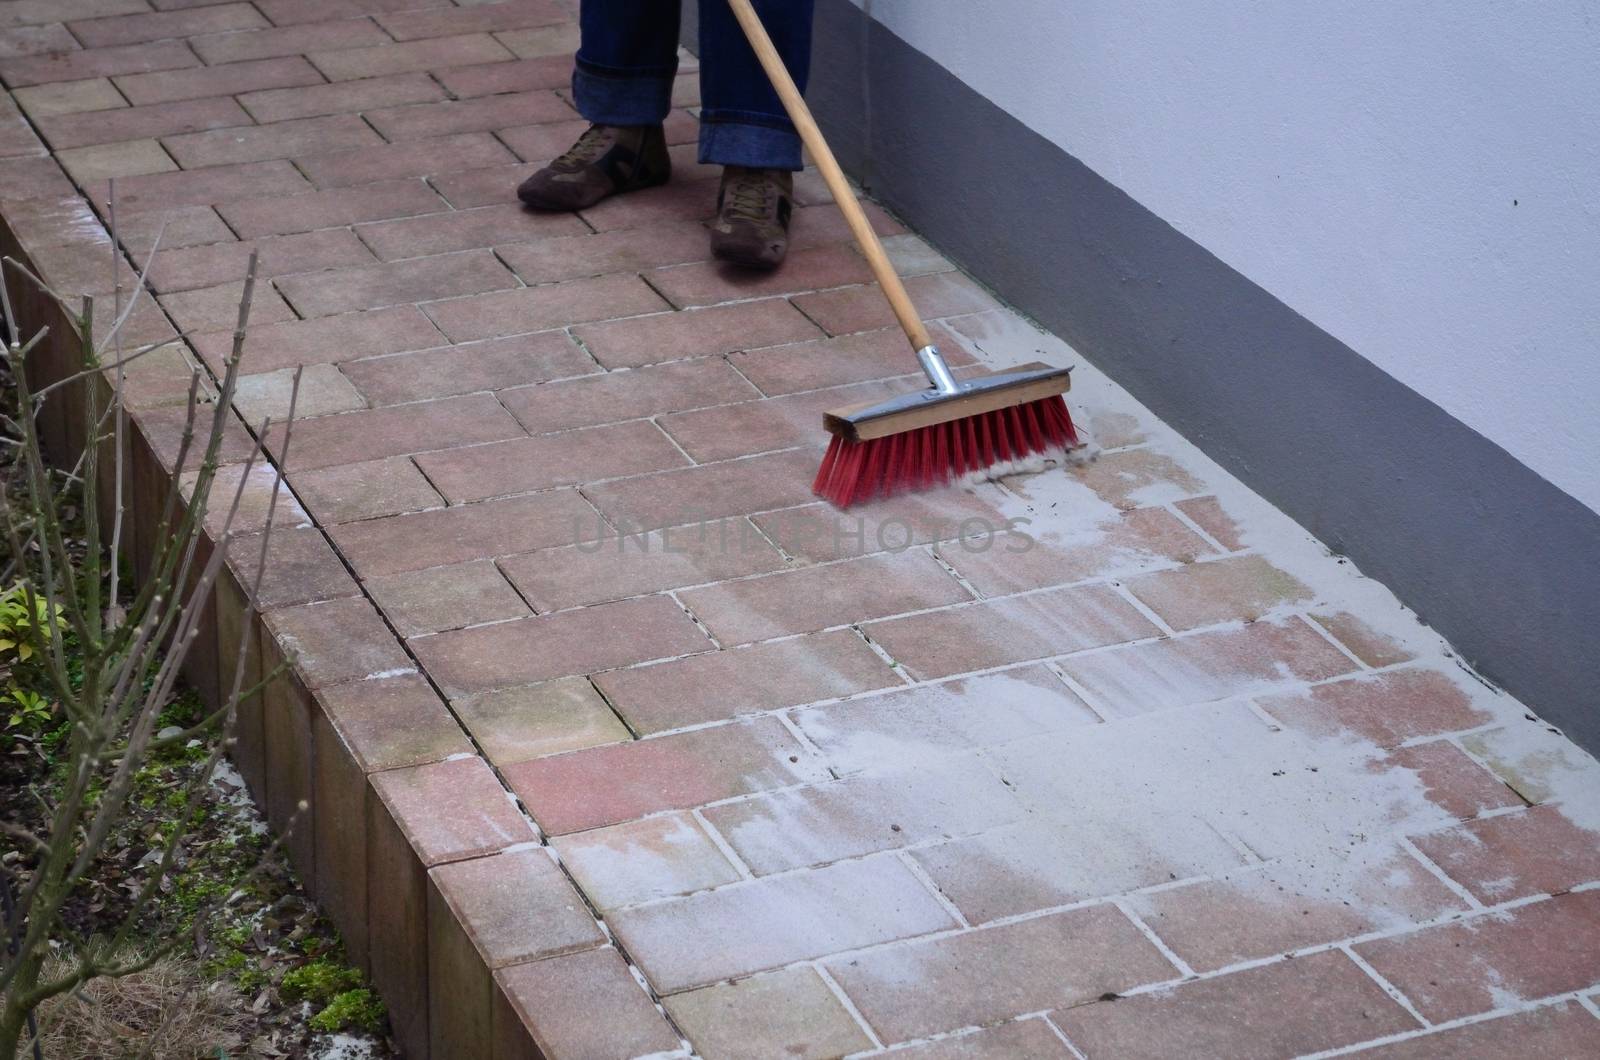 Sand in paving joint sweep it, grouting.
The new broom sweeps clean.